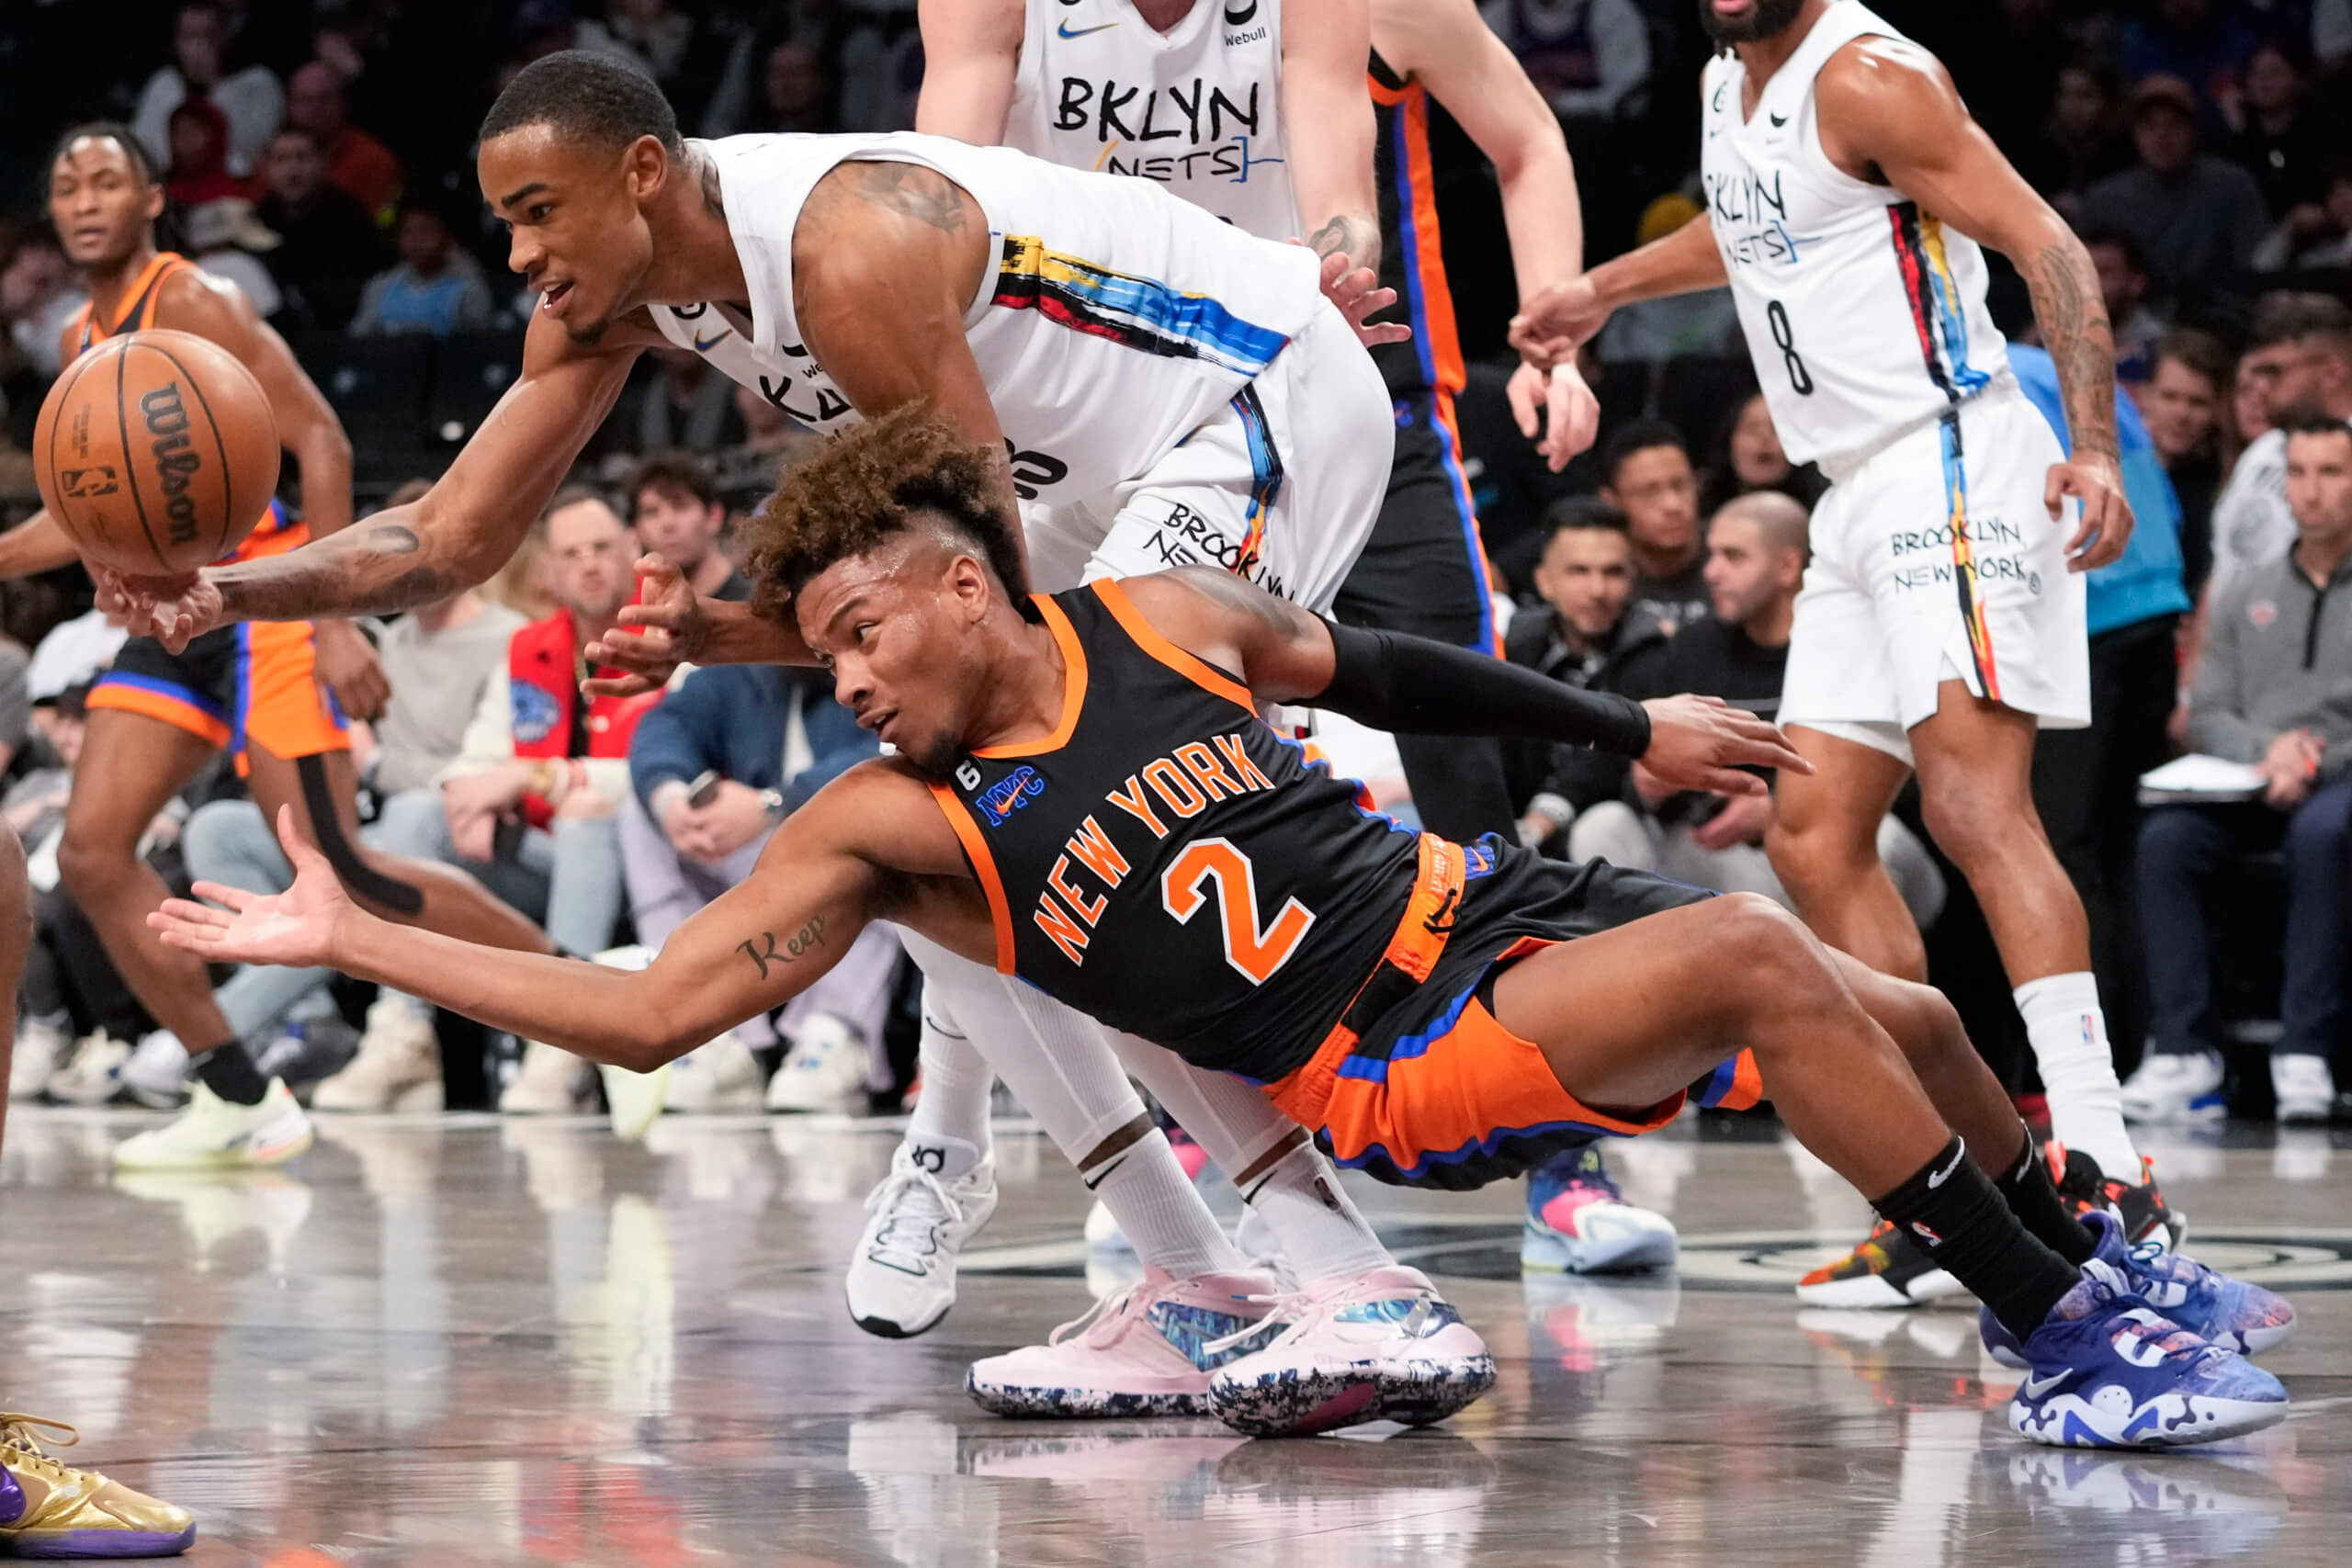 Miles McBride willing to do whatever it takes to play for Knicks